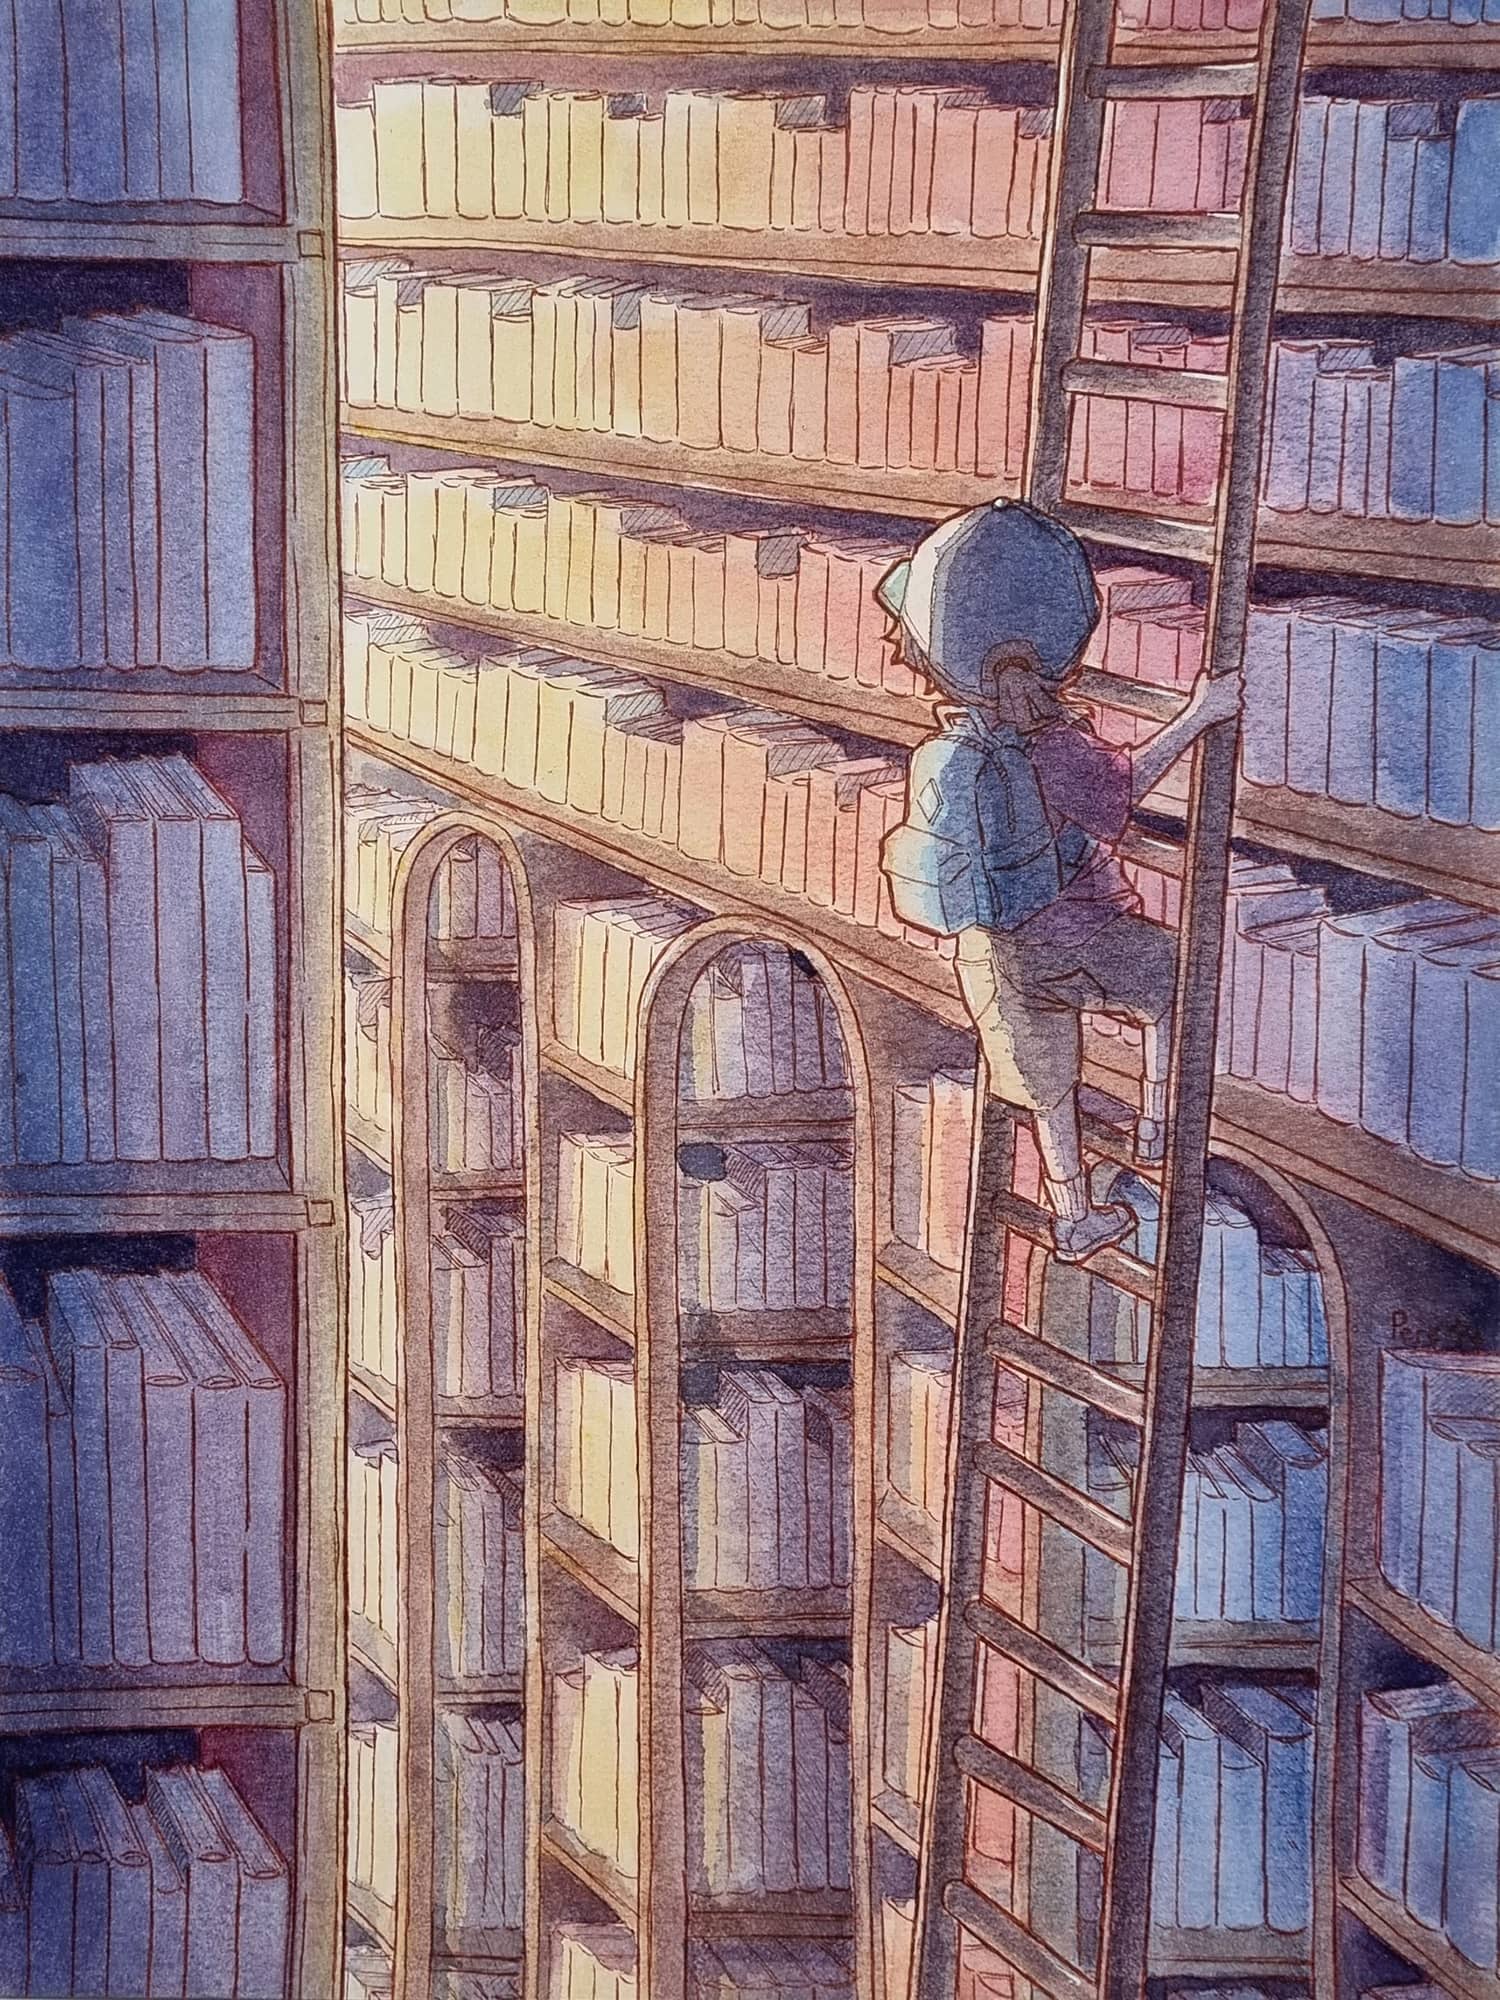 “The Bookstore” by Gleannie Pere